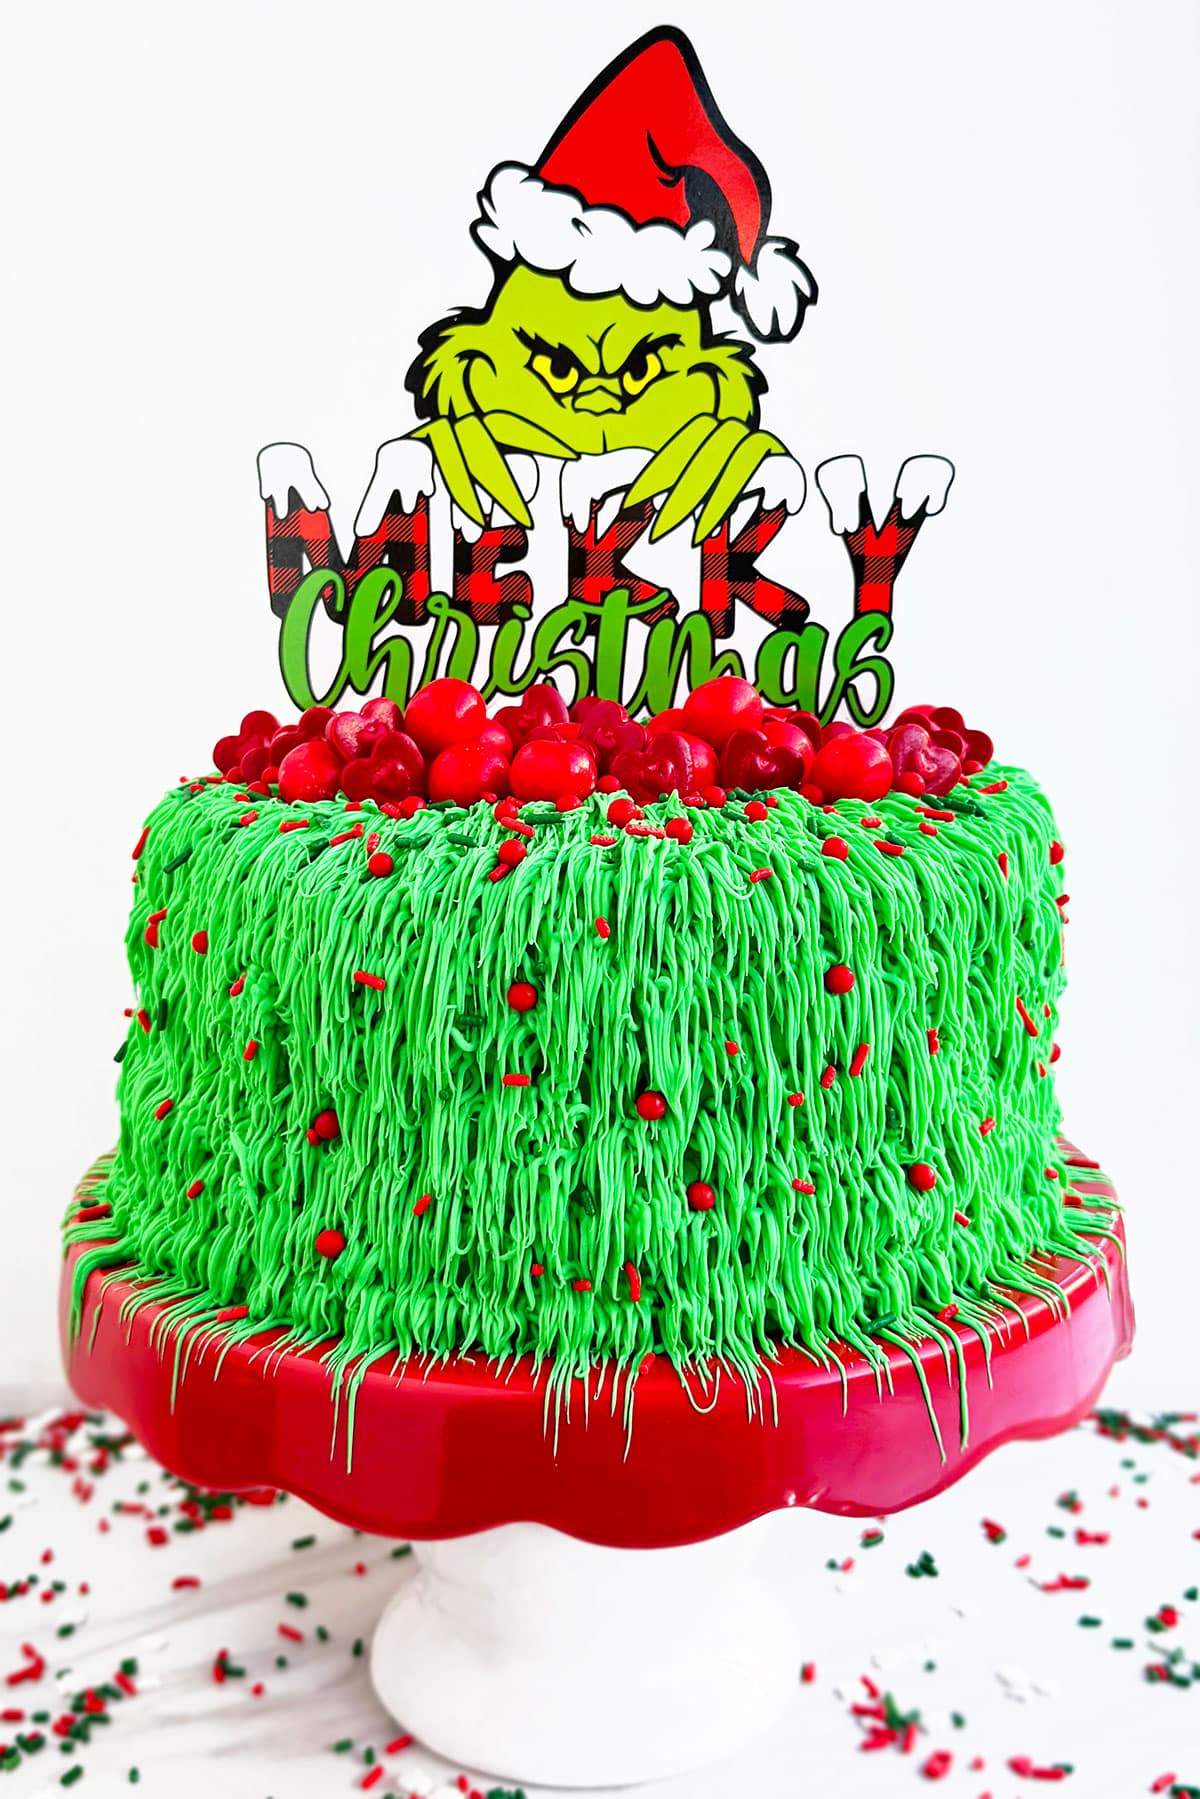 Easy Grinch Cake For Christmas on Red and White Cake Stand. 